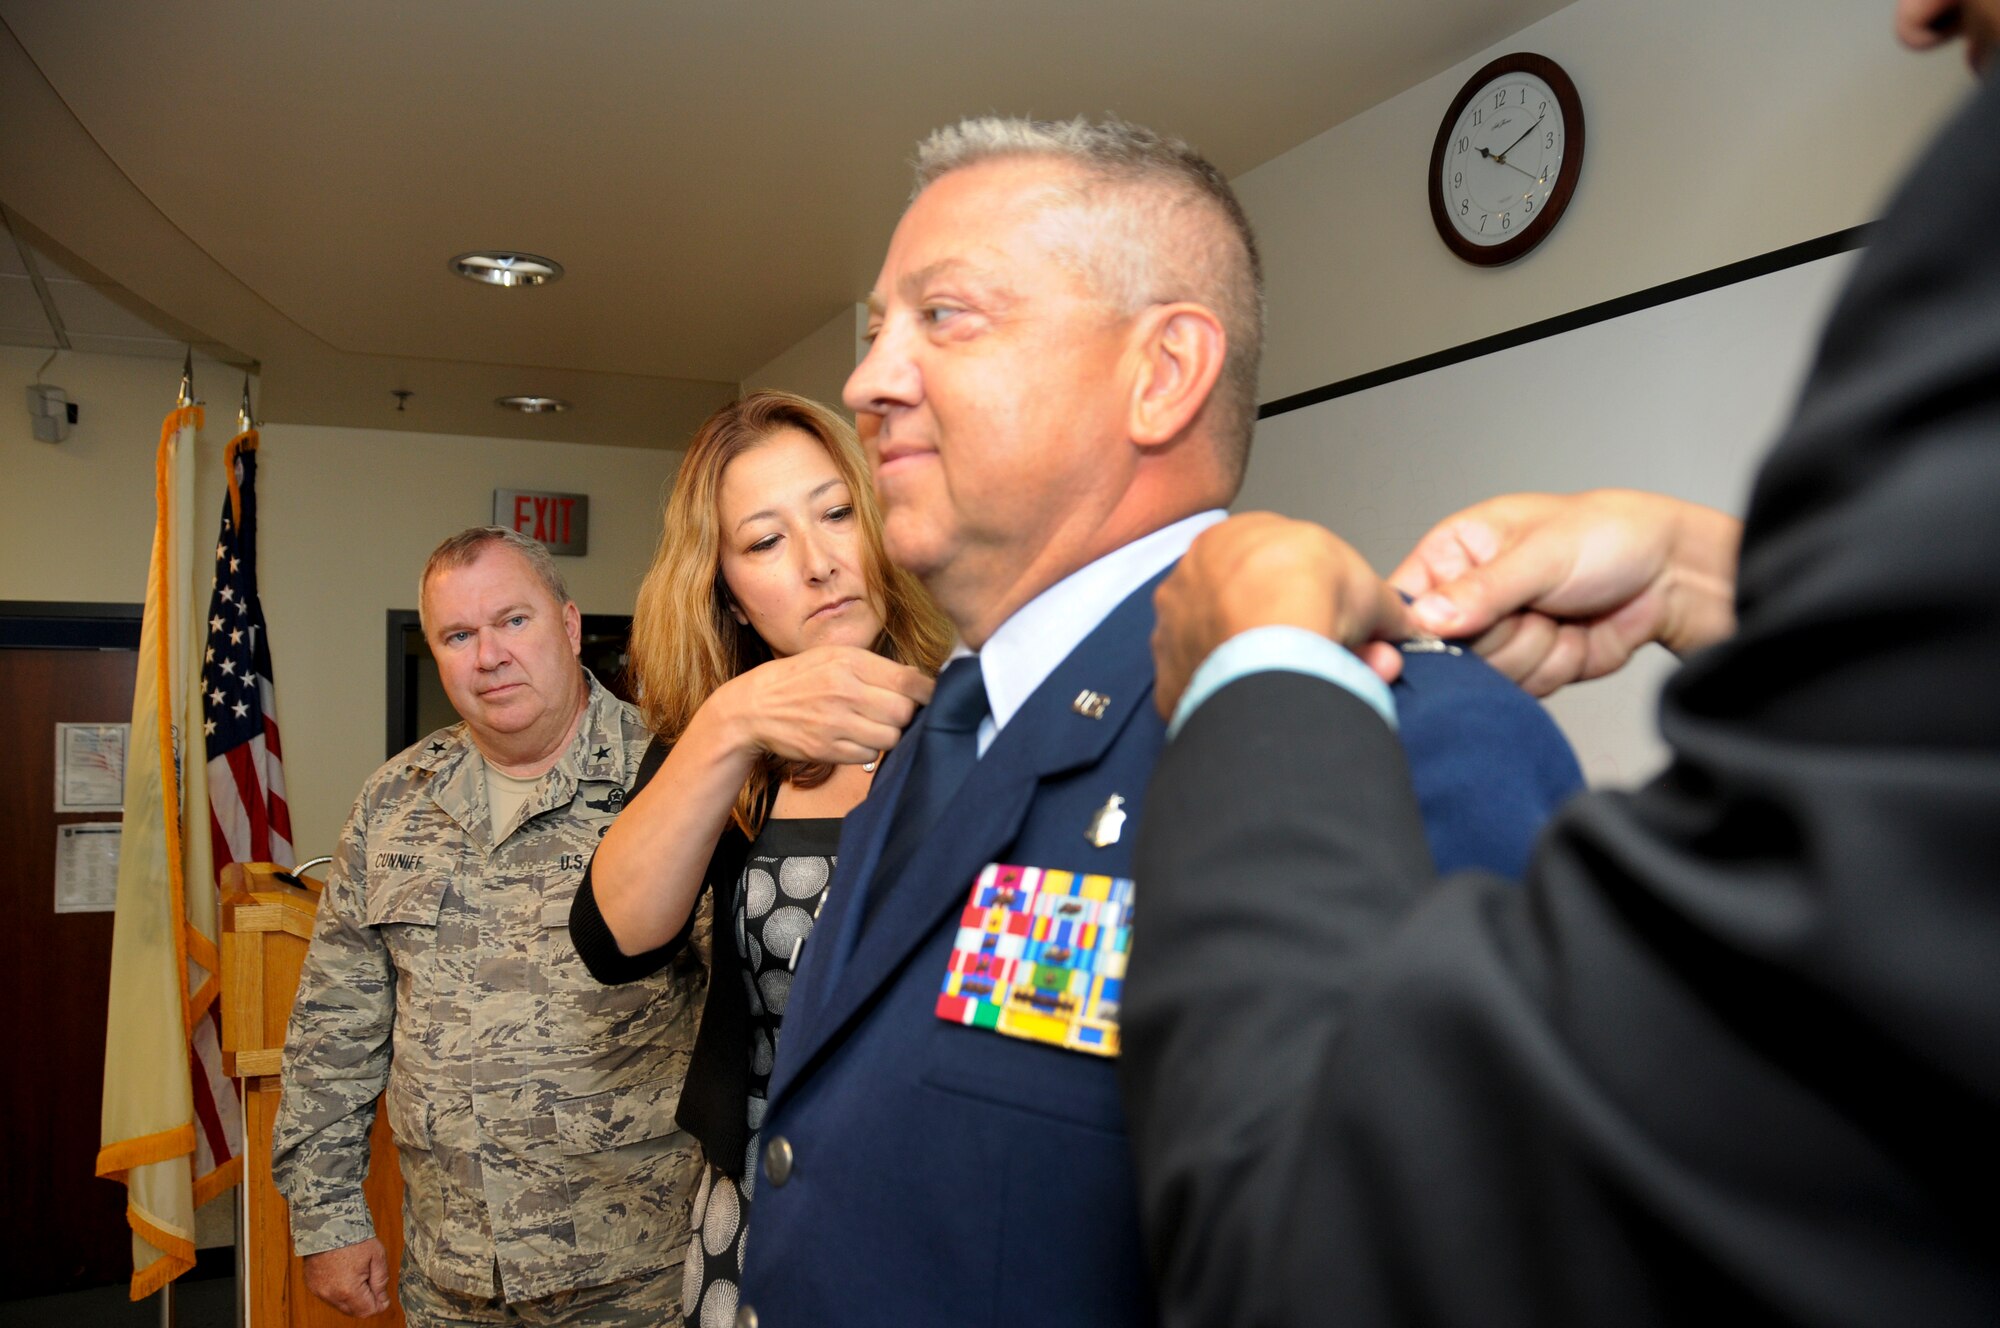 Newly promoted Col. Scott Blum, 108th Medical Group commander, stands proudly as his wife, Patricia, and son, Tyler, pin colonel rank on his service dress coat at his promotion ceremony at Joint Base McGuire-Dix-Lakehurst, N.J., July 7, 2014. (U.S. Air National Guard photo by Senior Airman Kellyann Novak/Released)